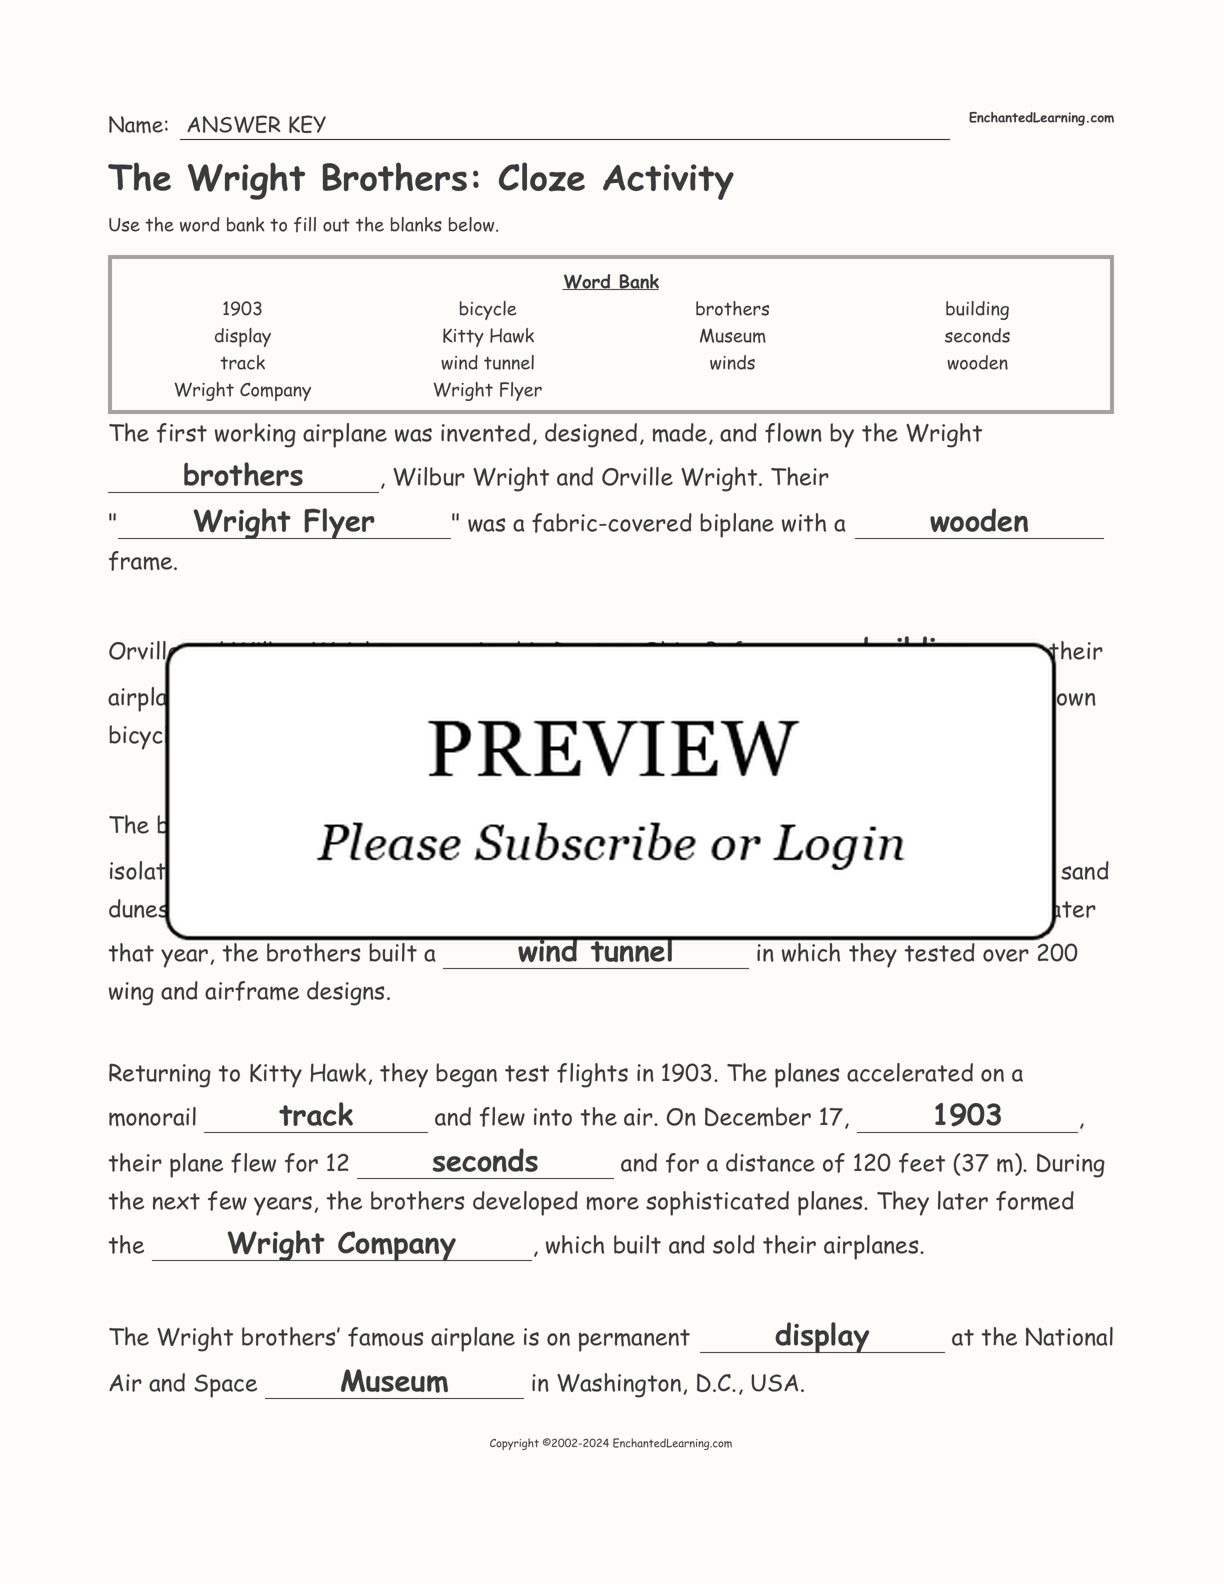 The Wright Brothers: Cloze Activity interactive worksheet page 2